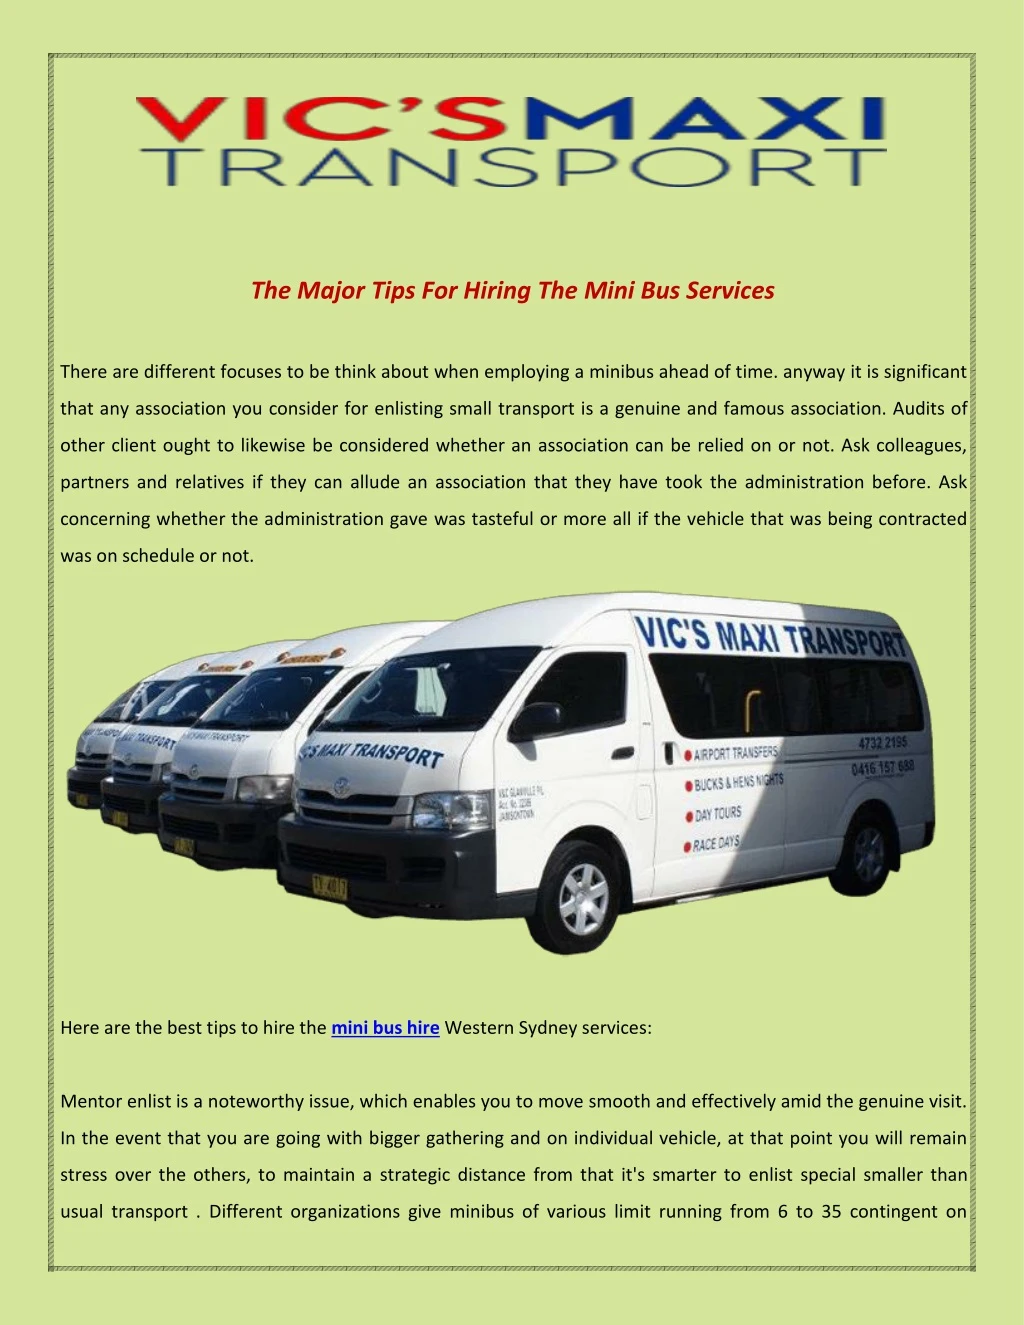 the major tips for hiring the mini bus services